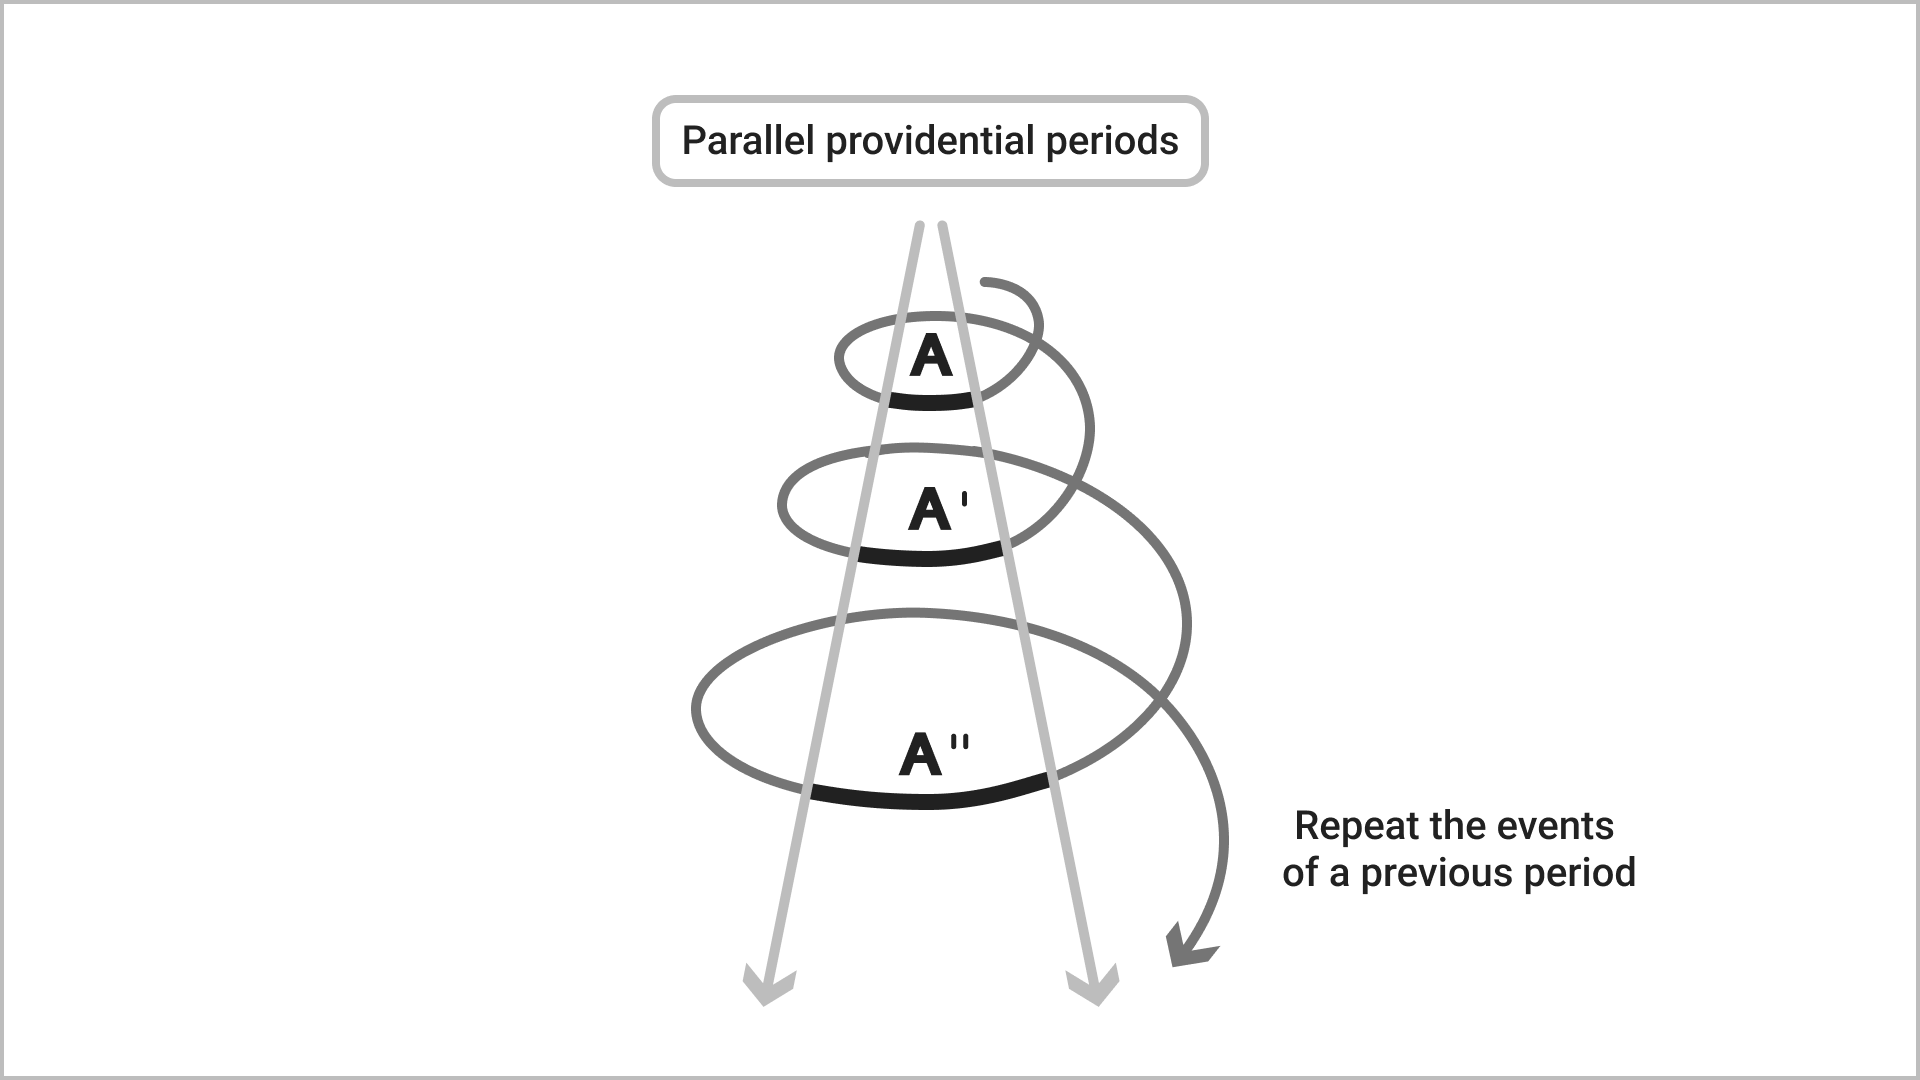 Parallel providential periods